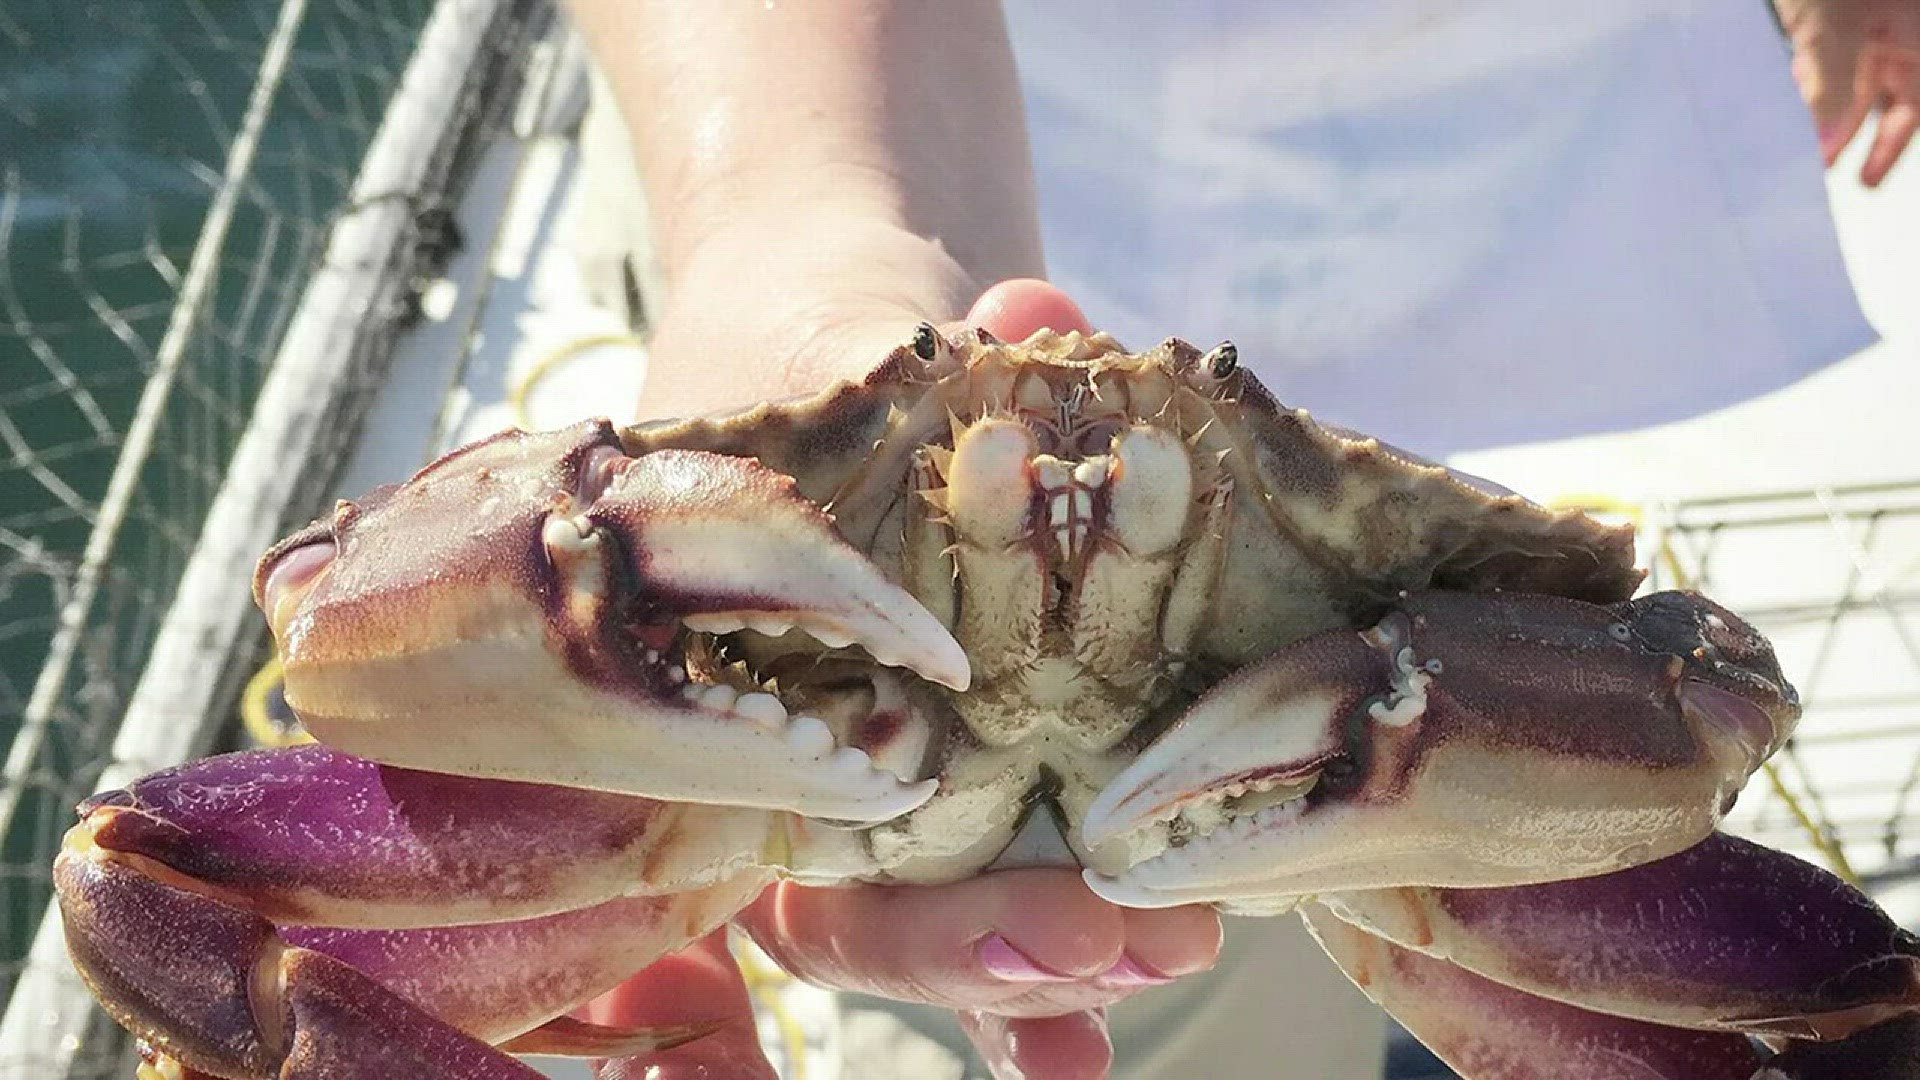 Washington Department of Fish and Wildlife officials are emphasizing safe crabbing as the season begins Saturday.